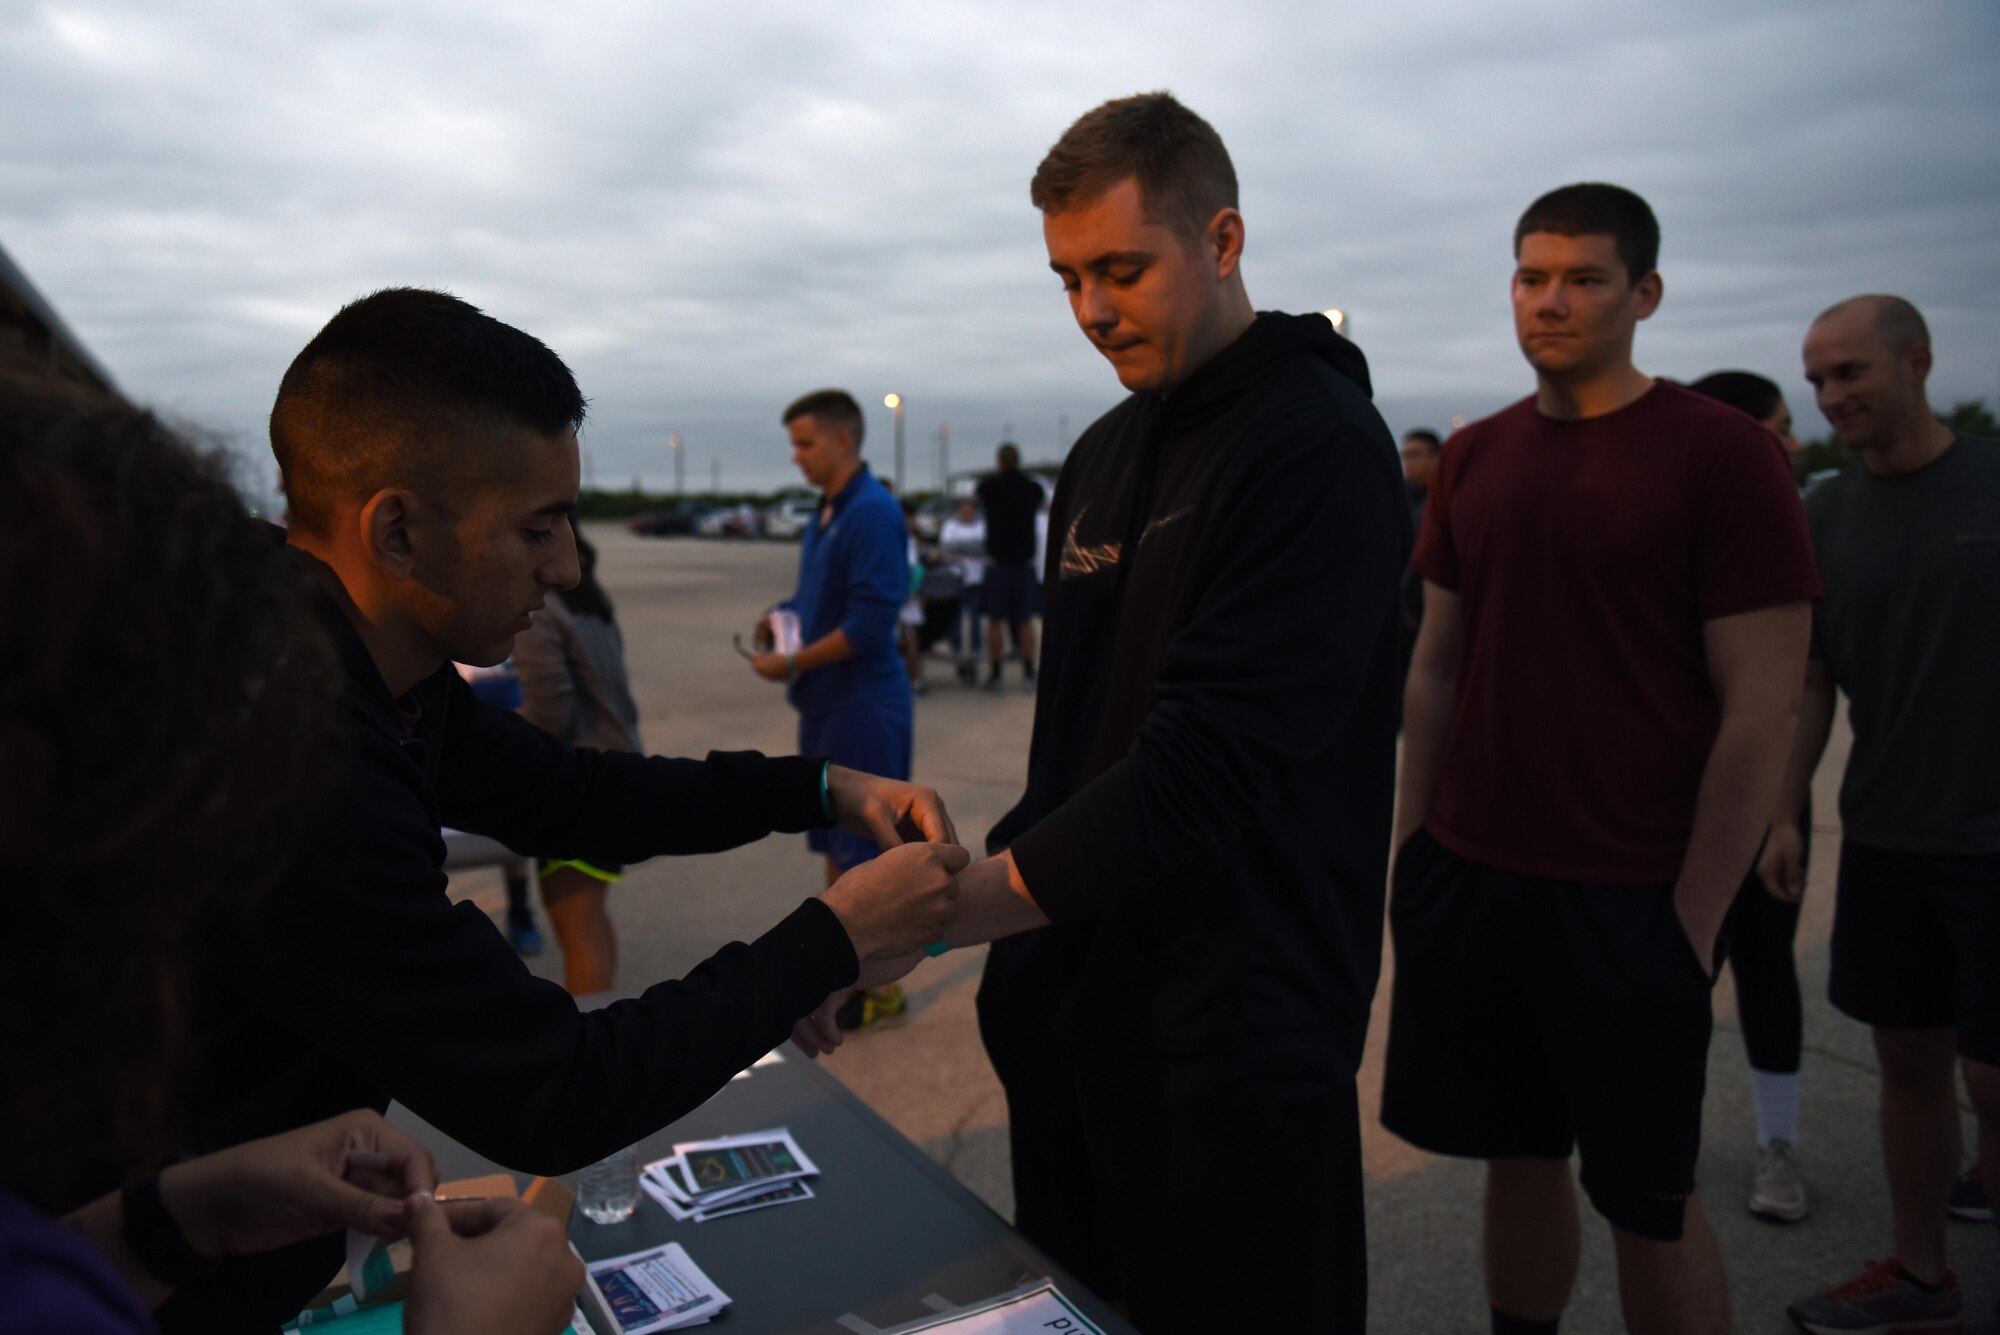 U.S. Air Force 2nd Lt. Ryan Davis, 315th Training Squadron student, signs in for the annual Sexual Assault Prevention and Response Color Run near the Kiowa Trail on Goodfellow Air Force Base, Texas, Oct. 8, 2016. The SAPR office gave the participants free white t-shirts for the run in order to spread sexual assault awareness. (U.S. Air Force photo by Airman 1st Class Caelynn Ferguson/Released)